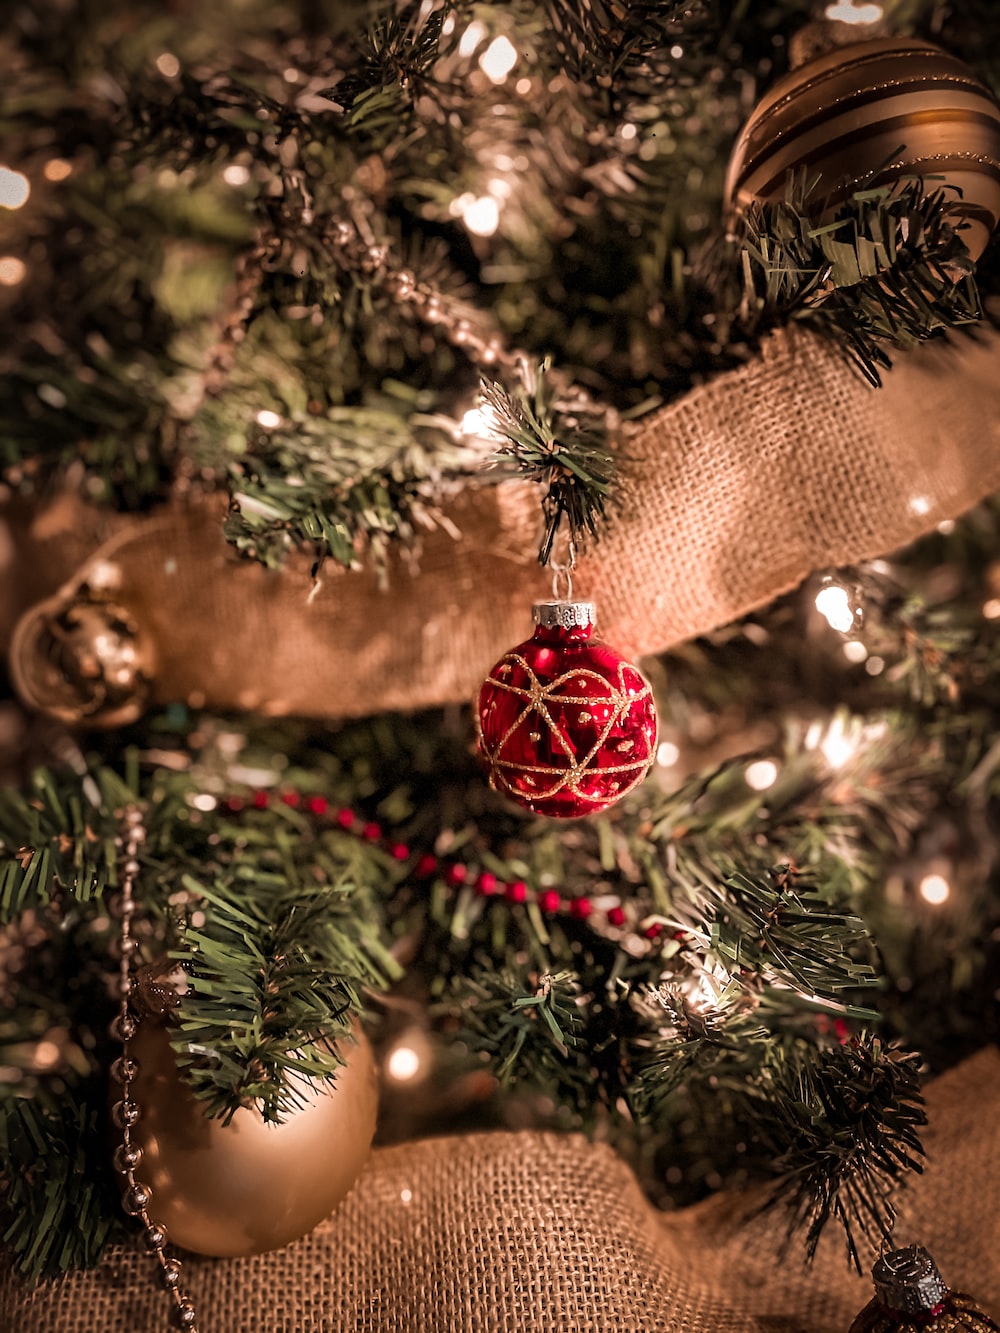 Green christmas tree with red baubles photo â free christmas tree image on